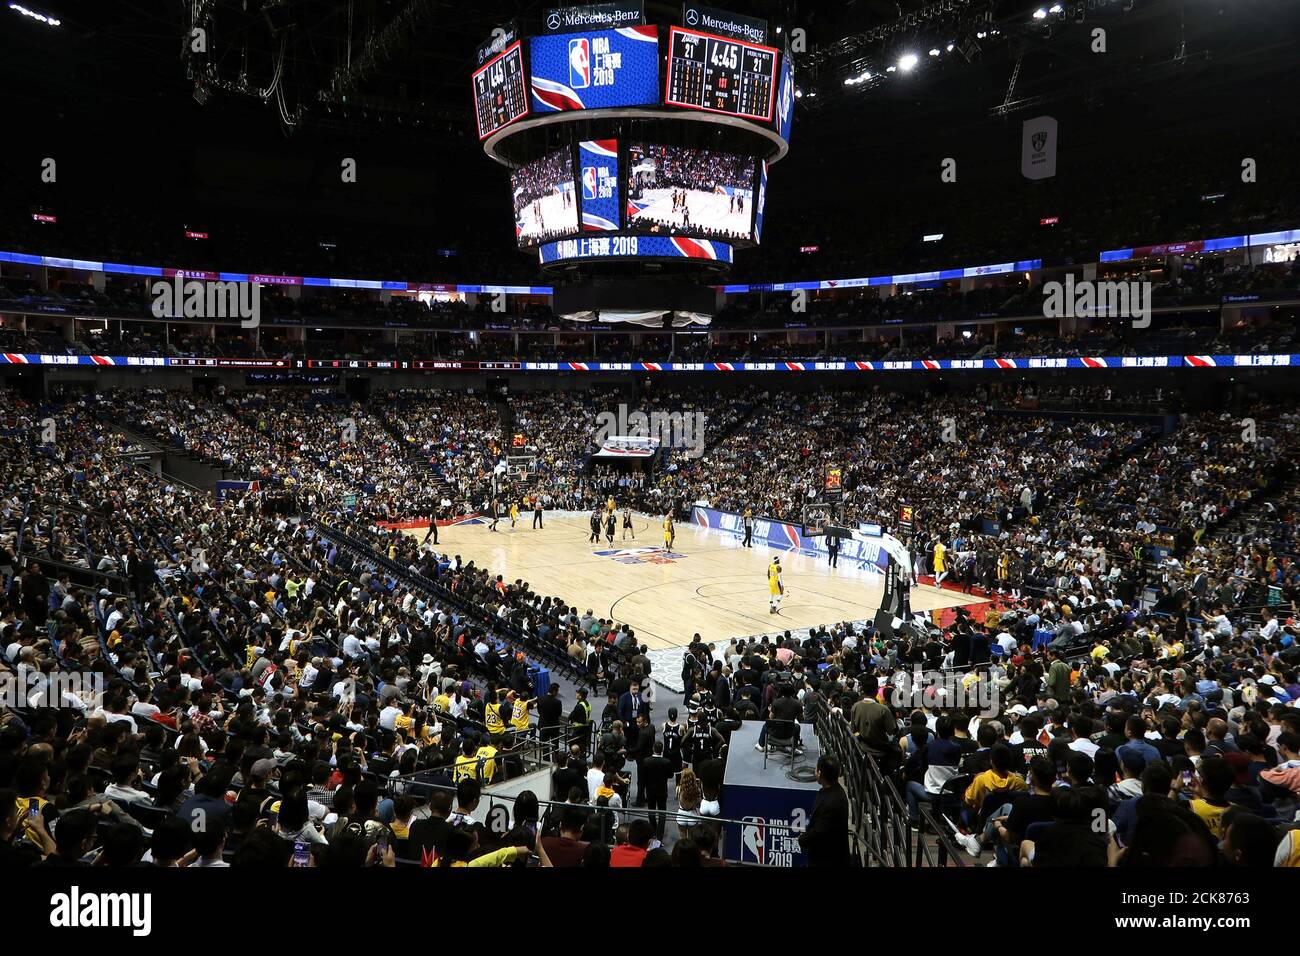 Basketball - NBA China Games - Los Angeles Lakers v Brooklyn Nets -  Mercedes-Benz Arena, Shanghai, China - October 10, 2019. General view of  the venue during the game. REUTERS/Xihao Jiang Stock Photo - Alamy